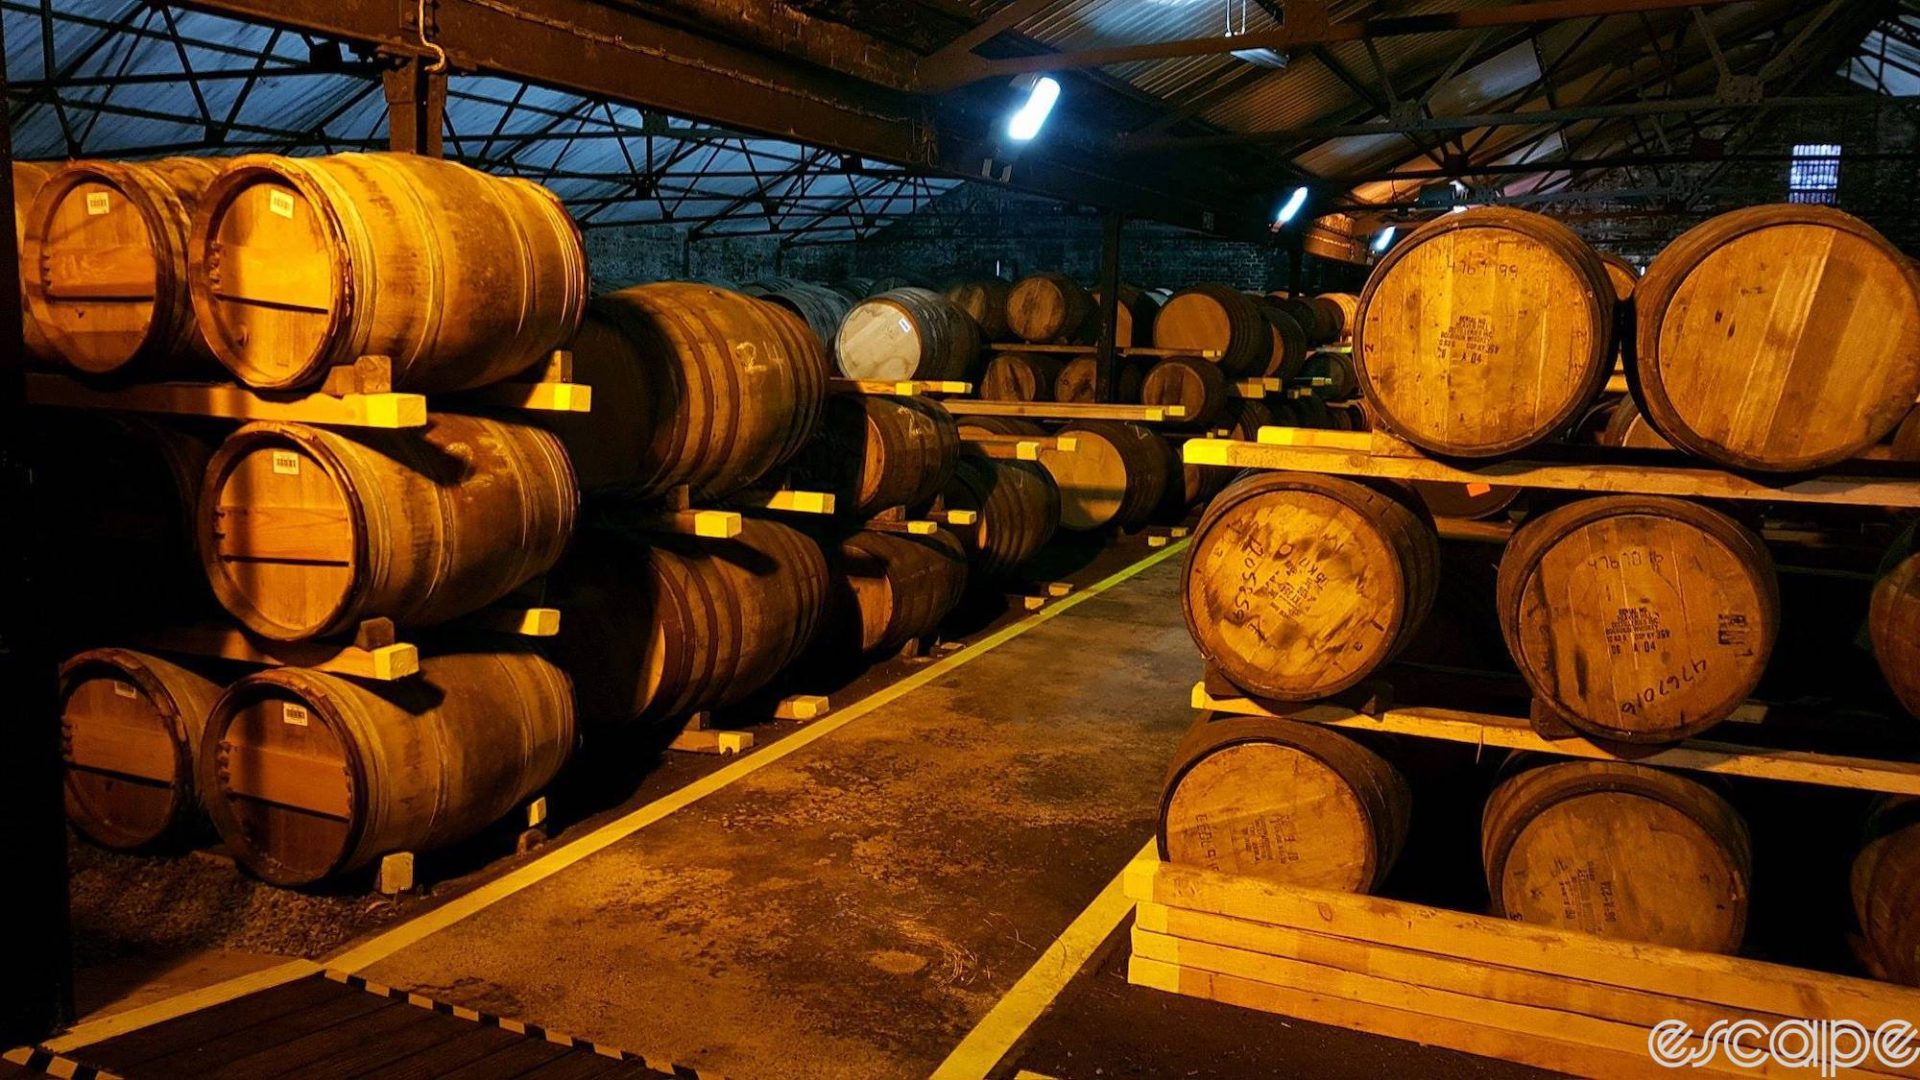 Barrels of whisky sit in a shed for aging at the Auchentoshan Distillery in Scotland.